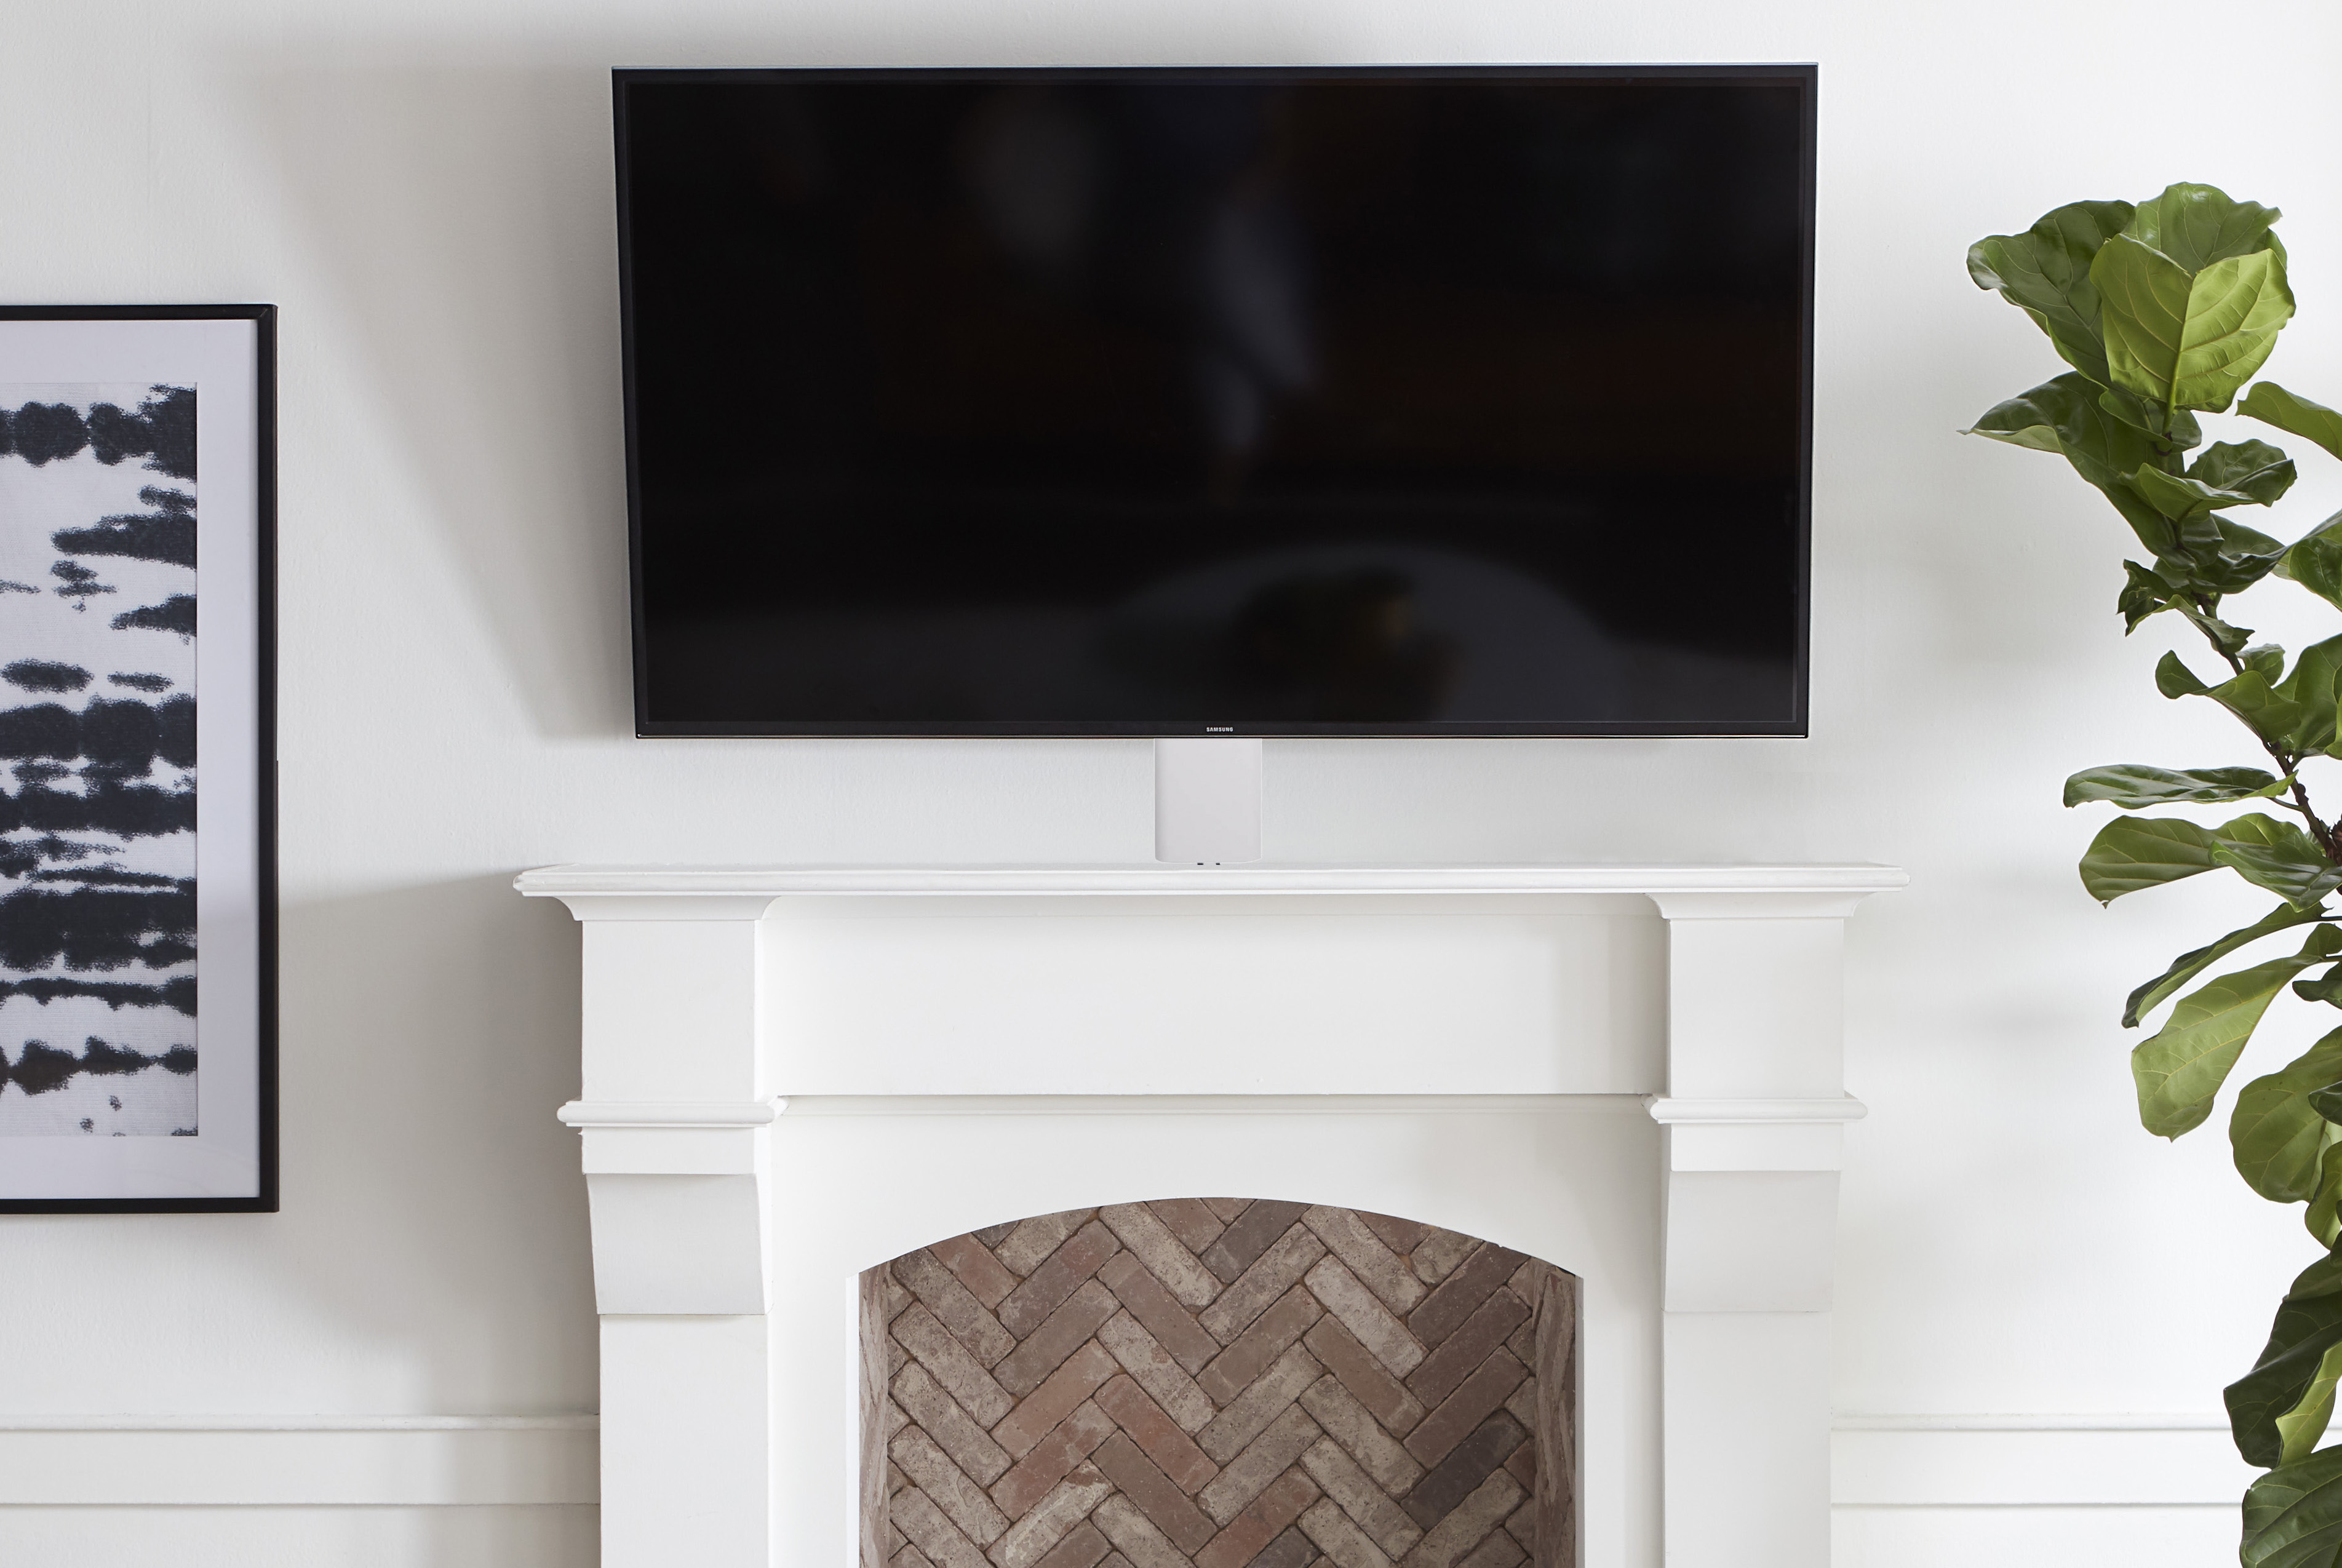 Mounting A Tv Over Fireplace How, How To Hang Tv Above Fireplace And Hide Wires